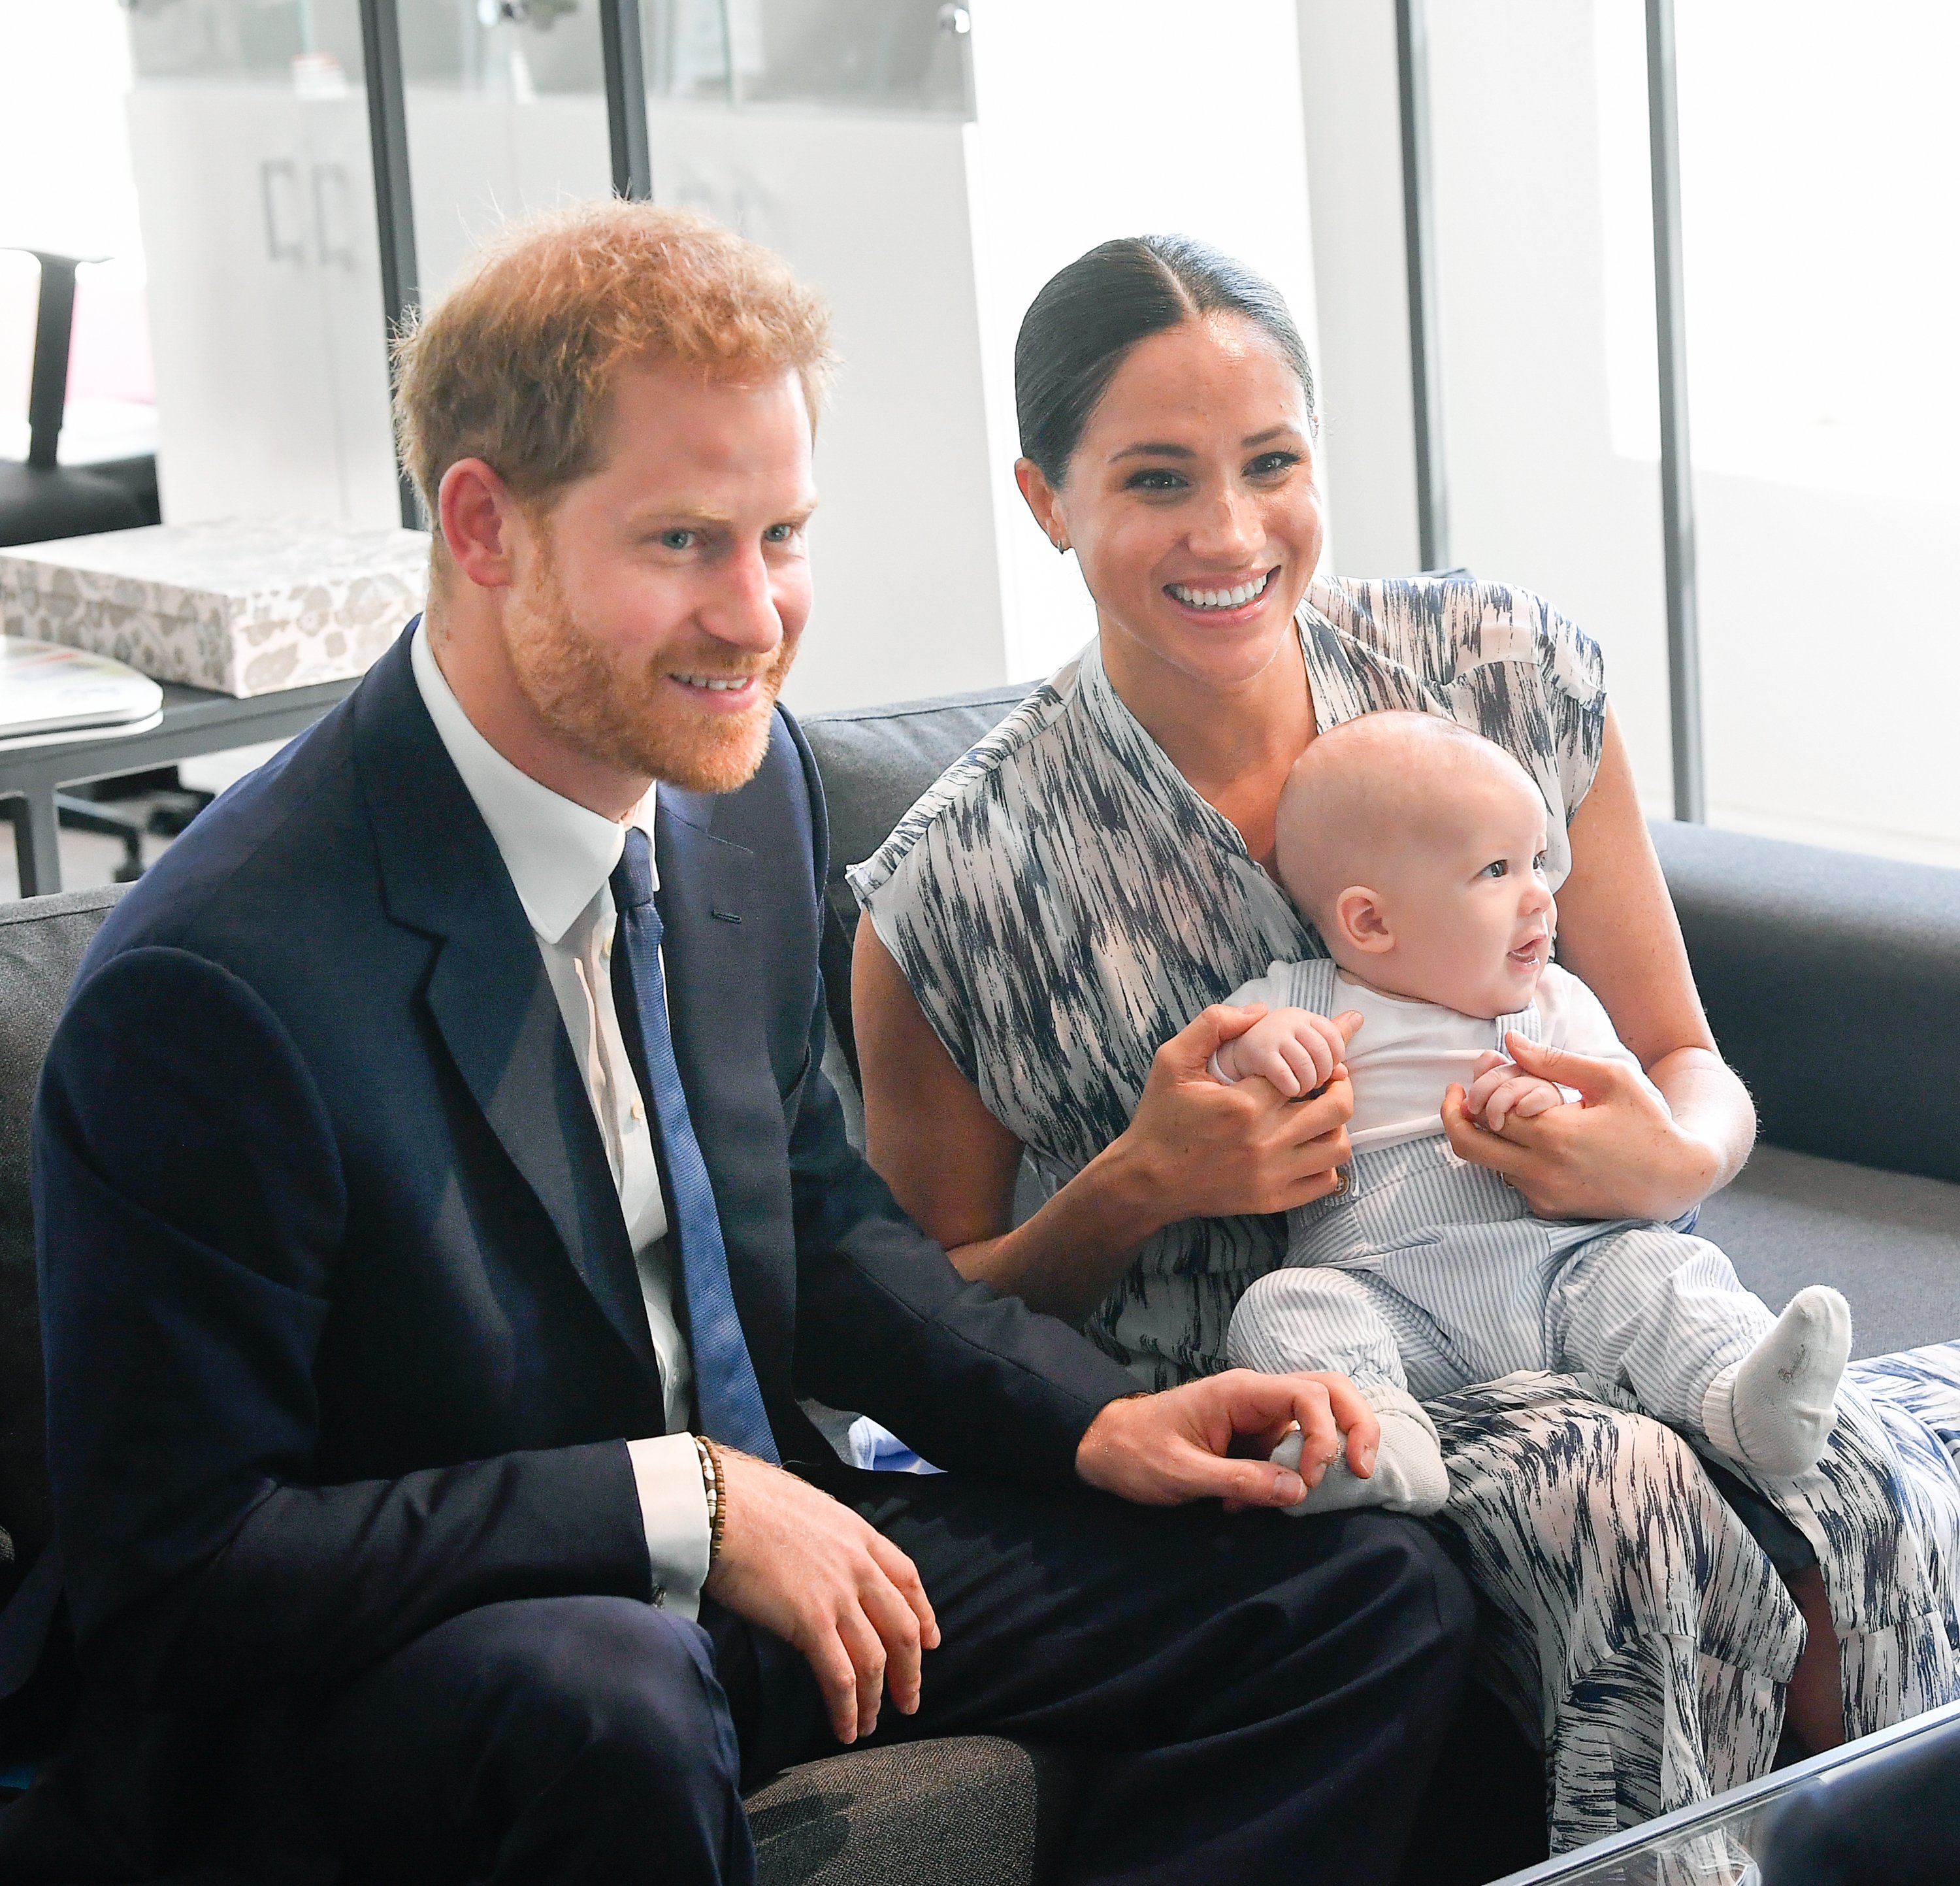 Prince Harry pictured with his wife Meghan Markle and their baby son Archie Mountbatten-Windsor during their royal tour of South Africa on September 25, 2019 in Cape Town, South Africa ┃Source: Getty Images